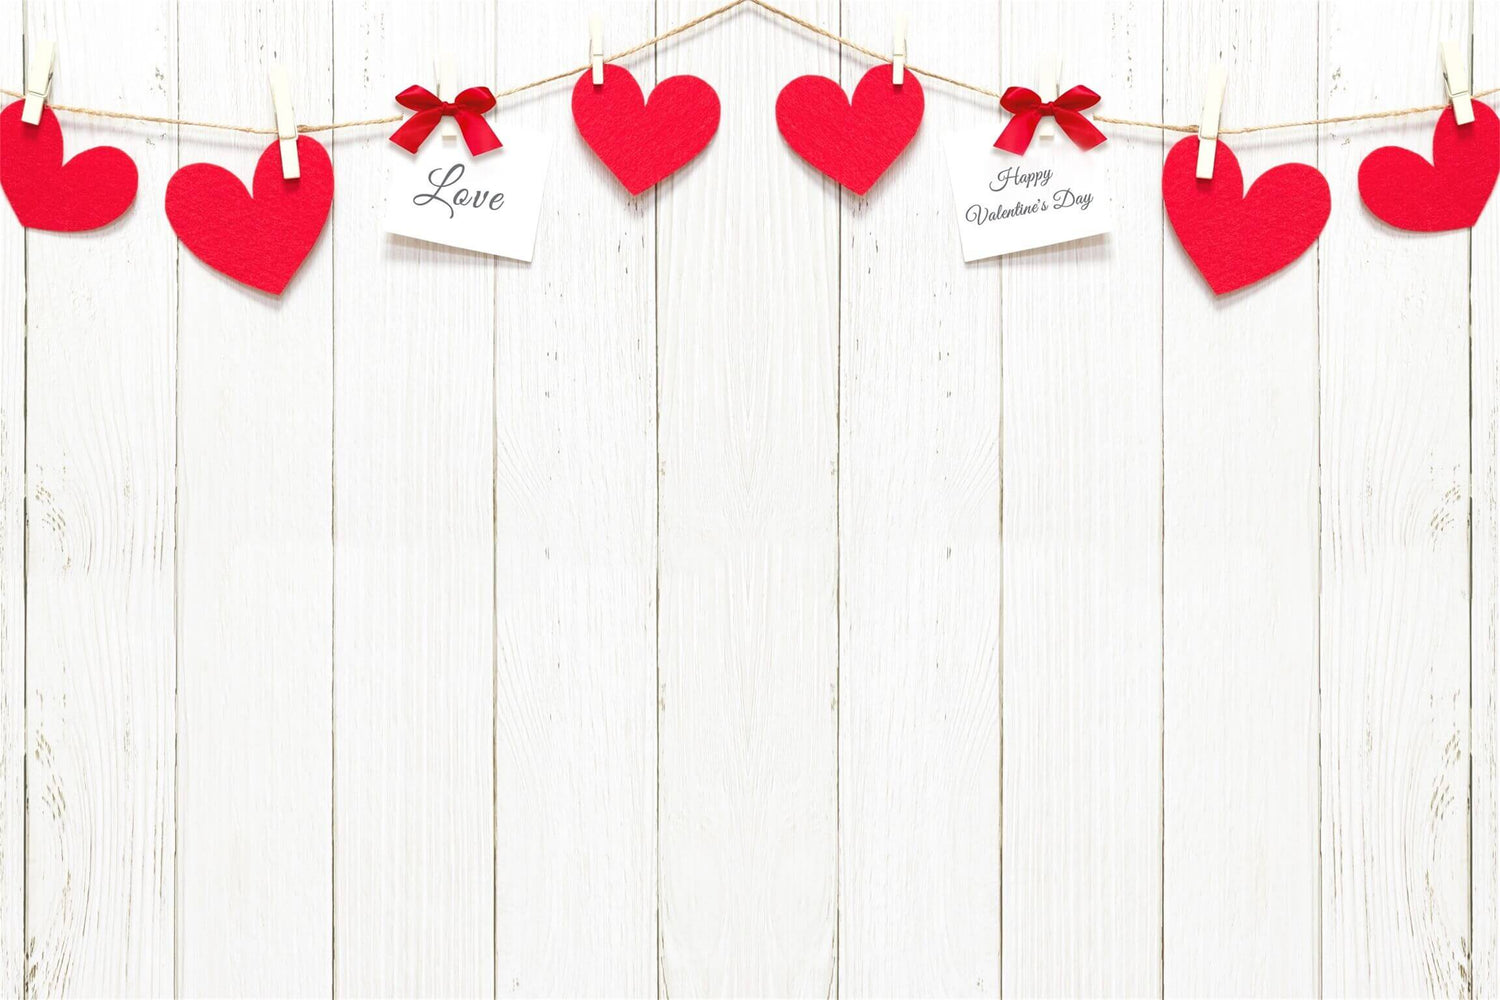 Valentine's Day White Shiplap Wall Red Heart Post-It Notes Bow